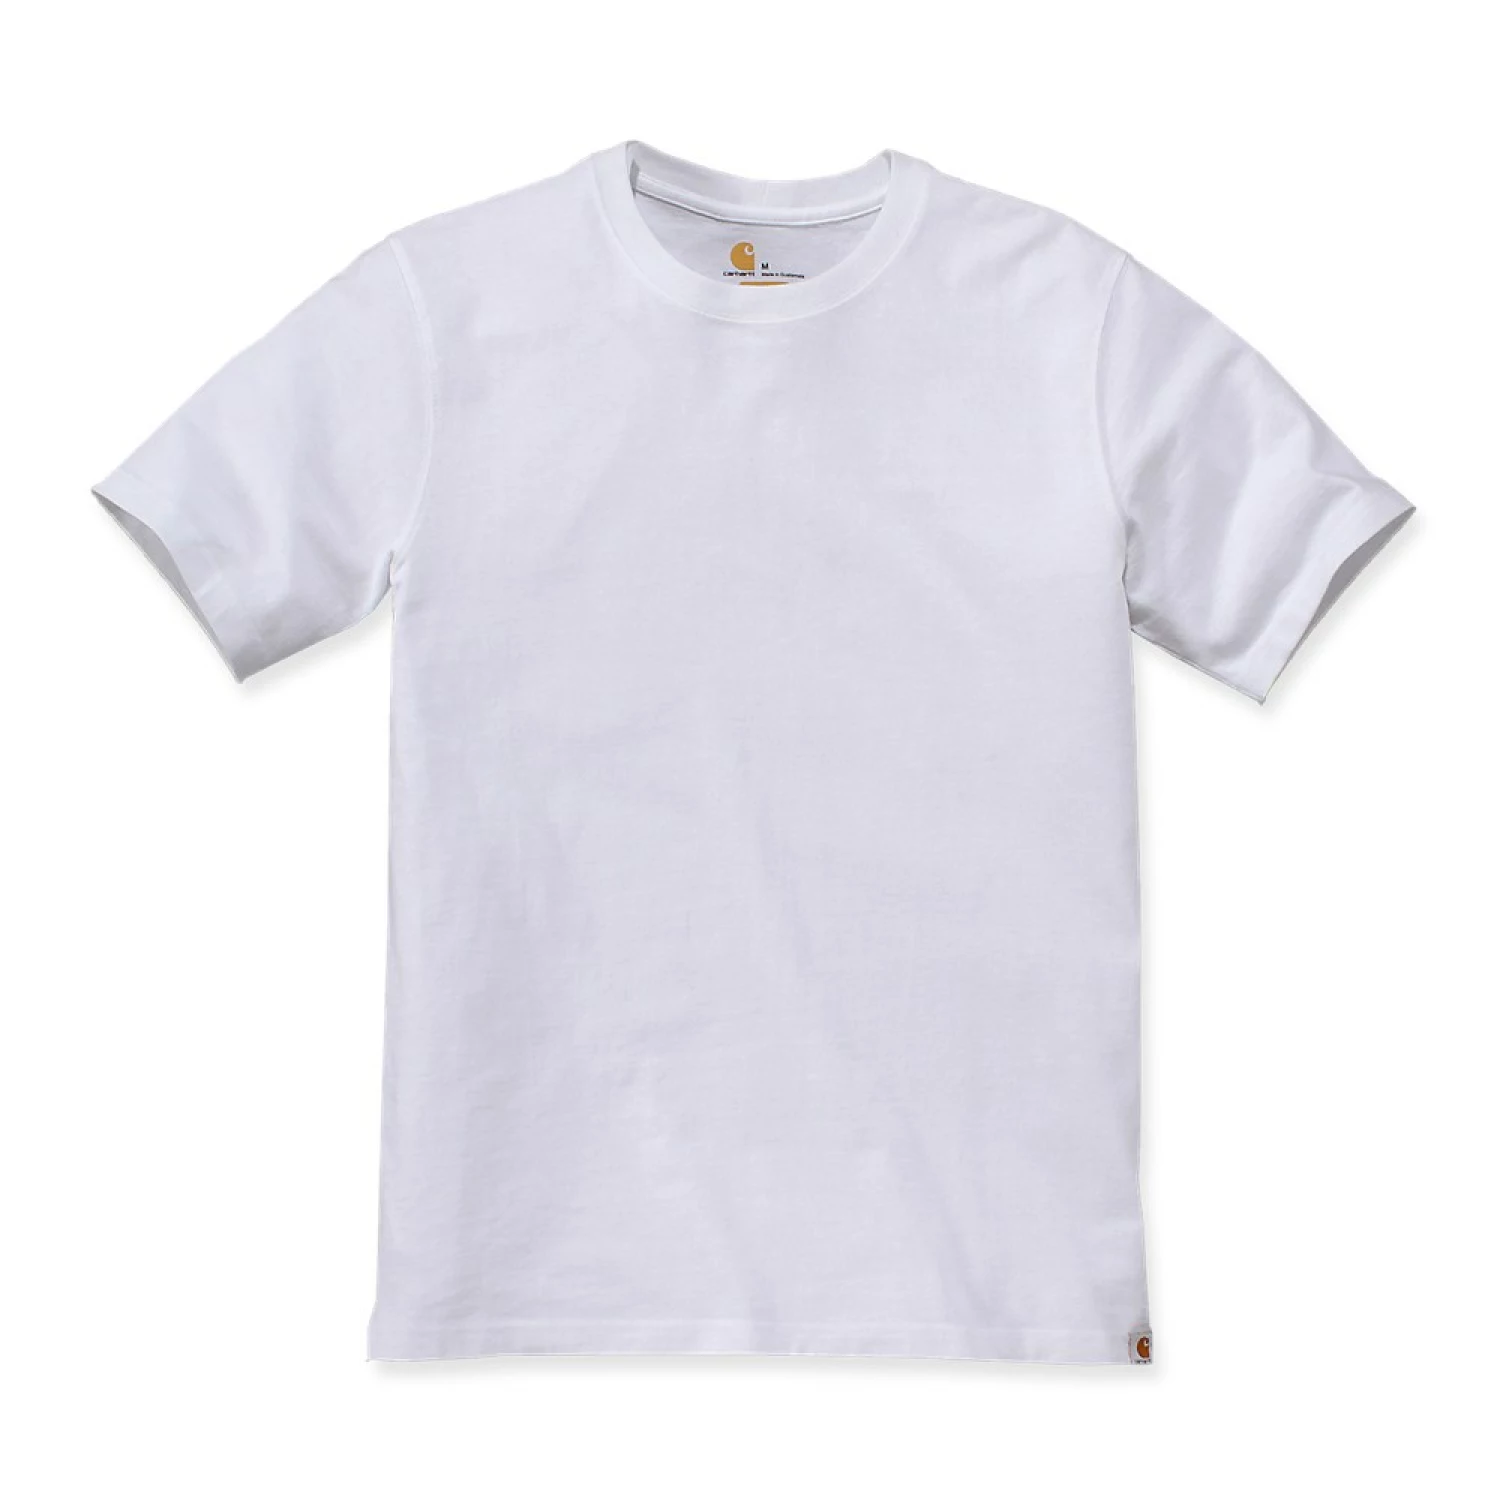 Carhartt 104264 Workwear Solid T-Shirt - Relaxed Fit - White - XXL